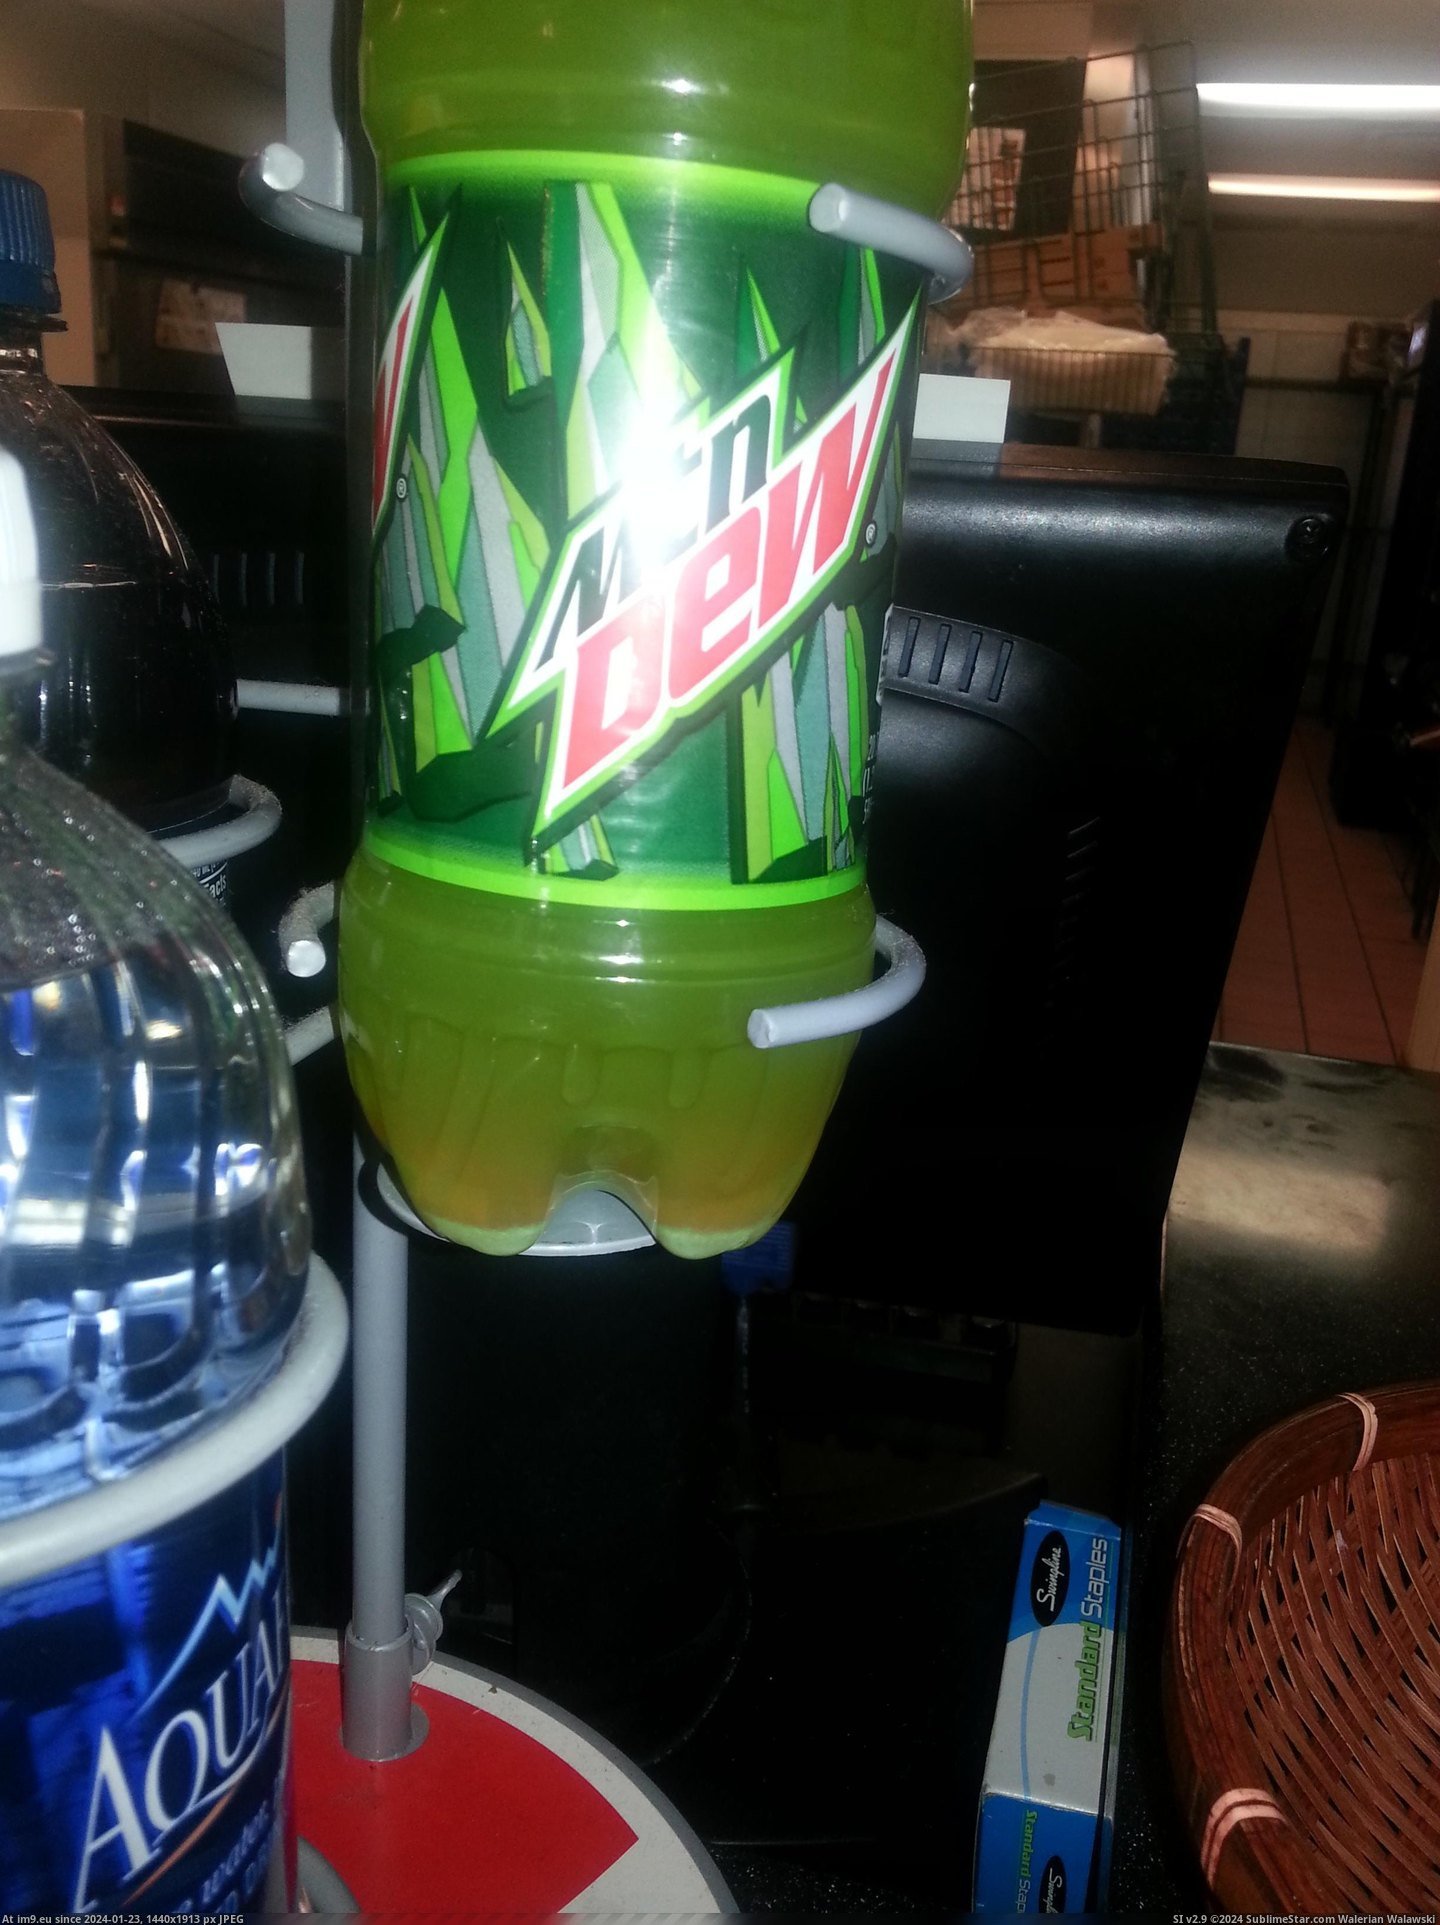 #Model #Mountain #Settling #Separating #Display #Dew [Mildlyinteresting] This Mountain Dew display model has started separating and settling. Pic. (Image of album My r/MILDLYINTERESTING favs))